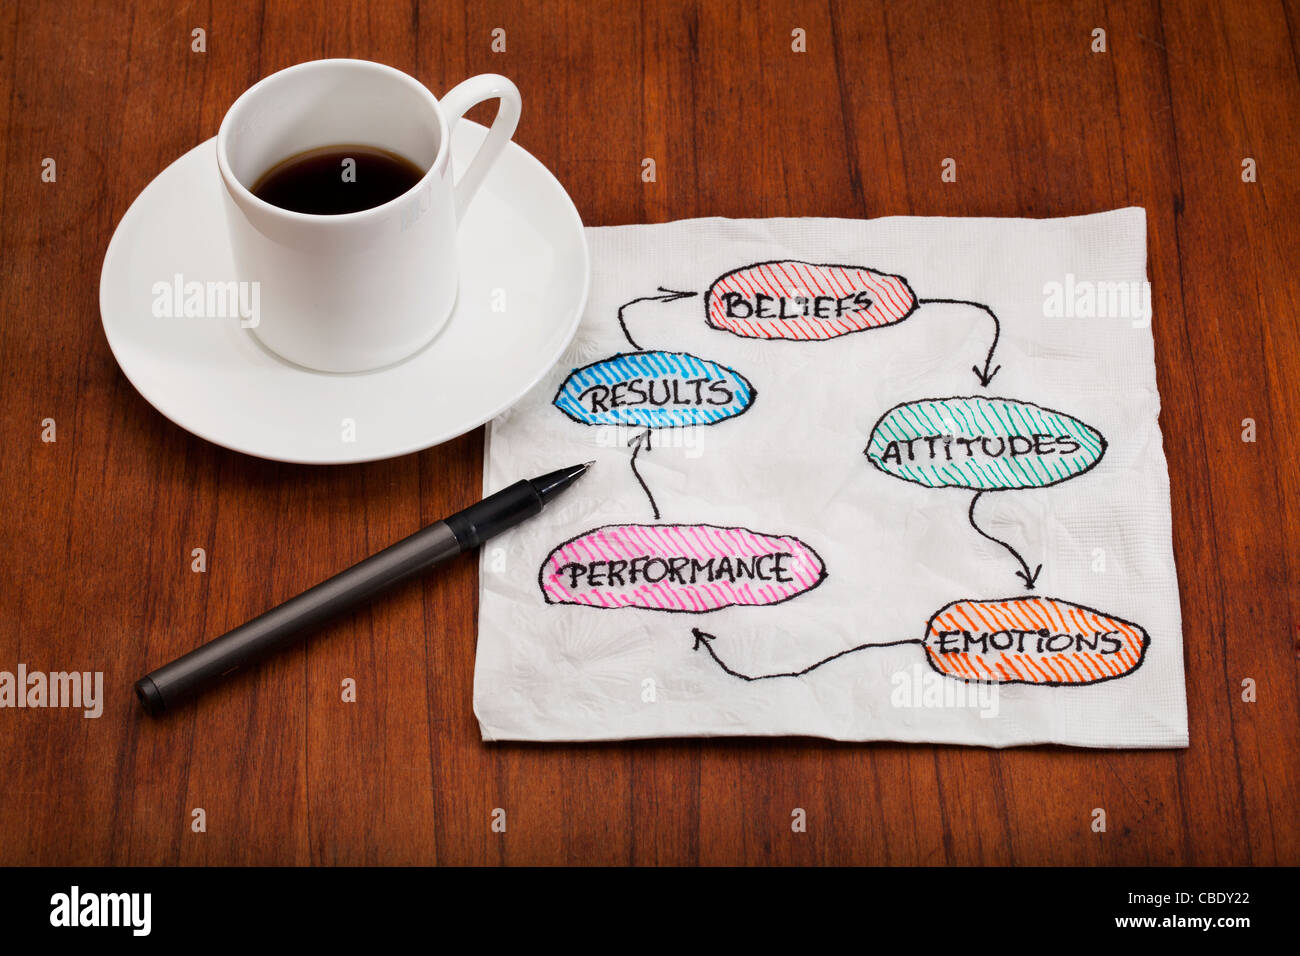 belief, attitude, emotion, performance, result, feedback cycle - concept presented as a napkin doodle with espresso coffee cup Stock Photo